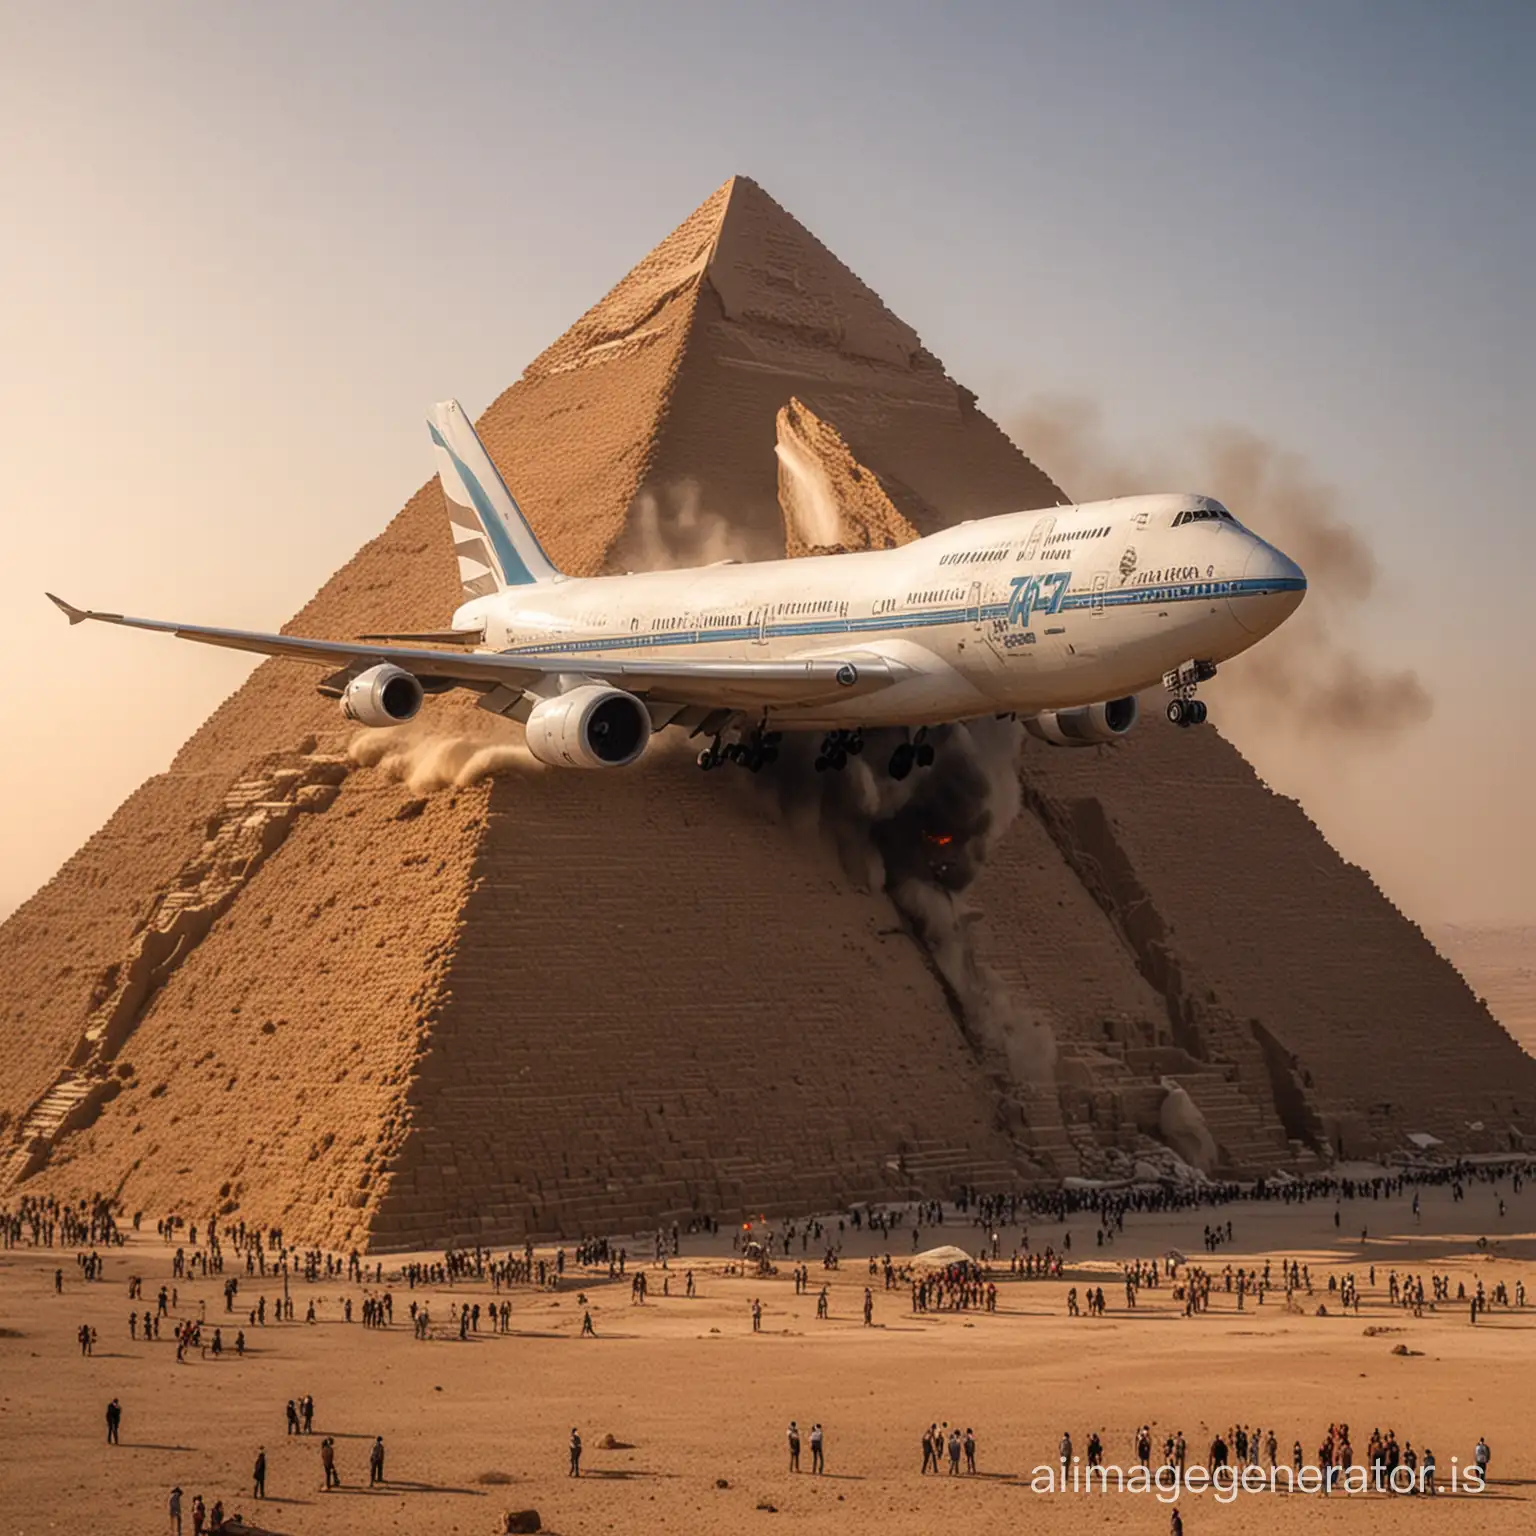 Boeing-747-Accident-Collides-with-Egyptian-Pyramid